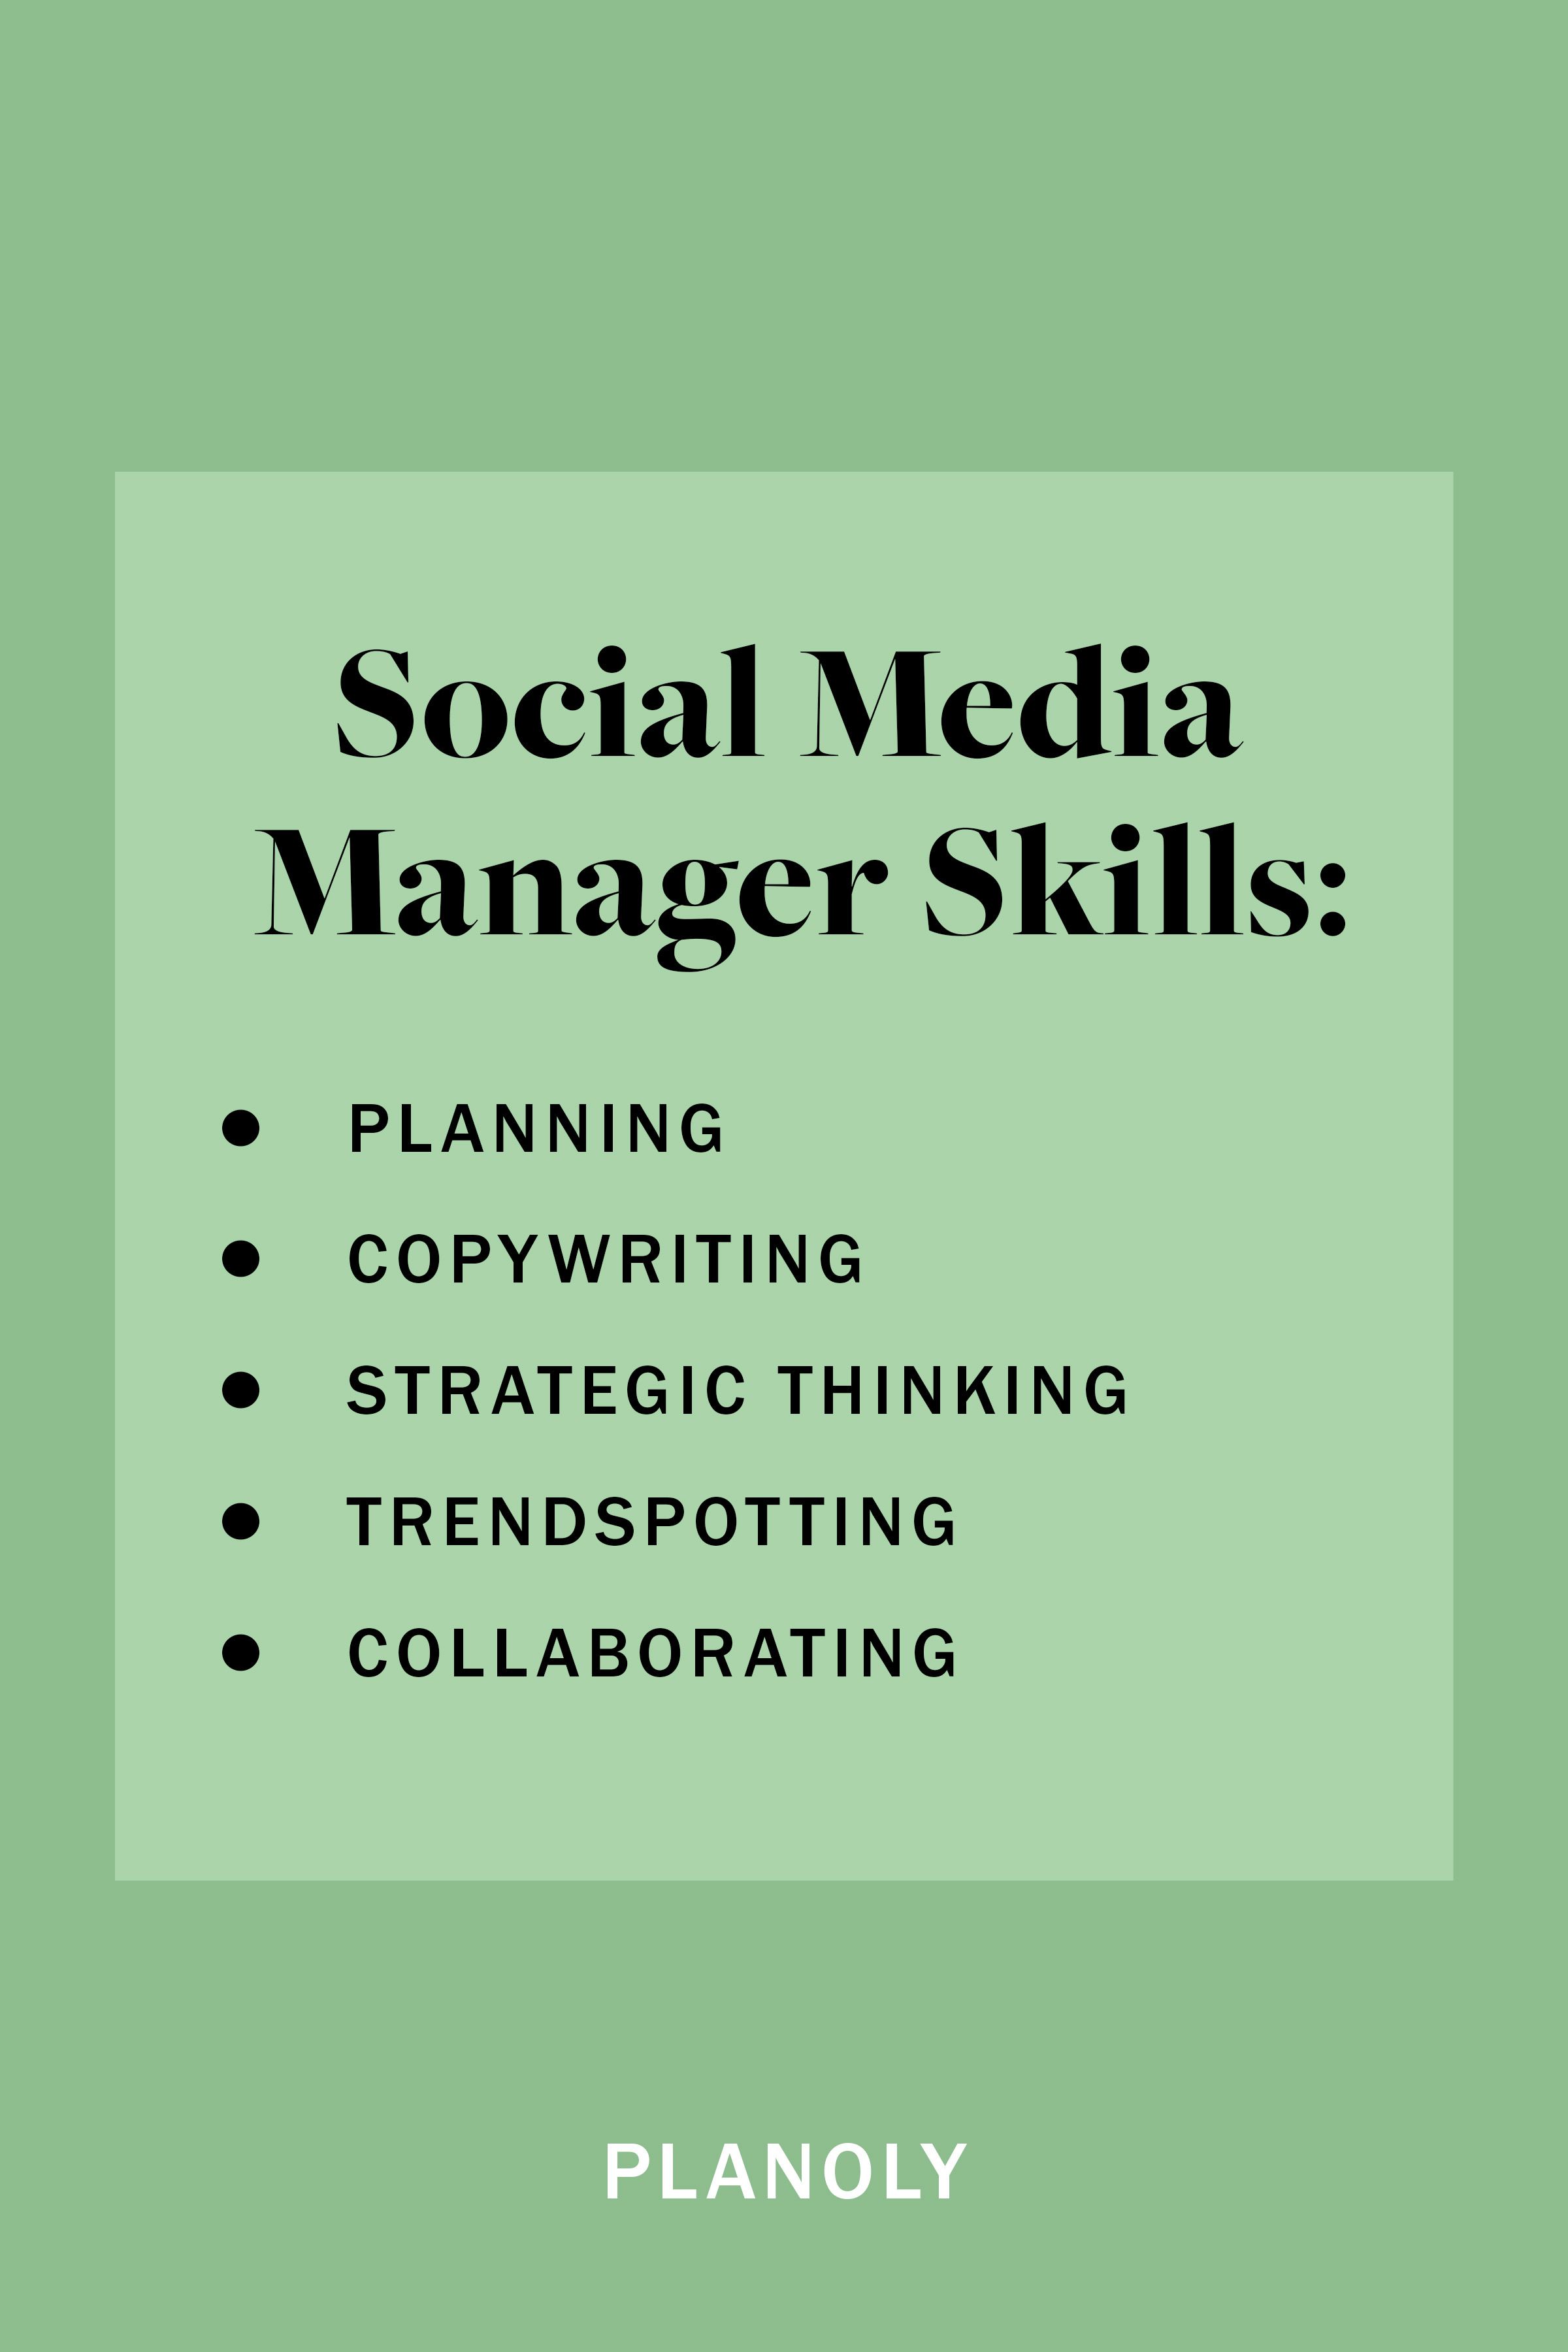 PLANOLY-Blog Post-How to Hire a Social Media Manager-Image2